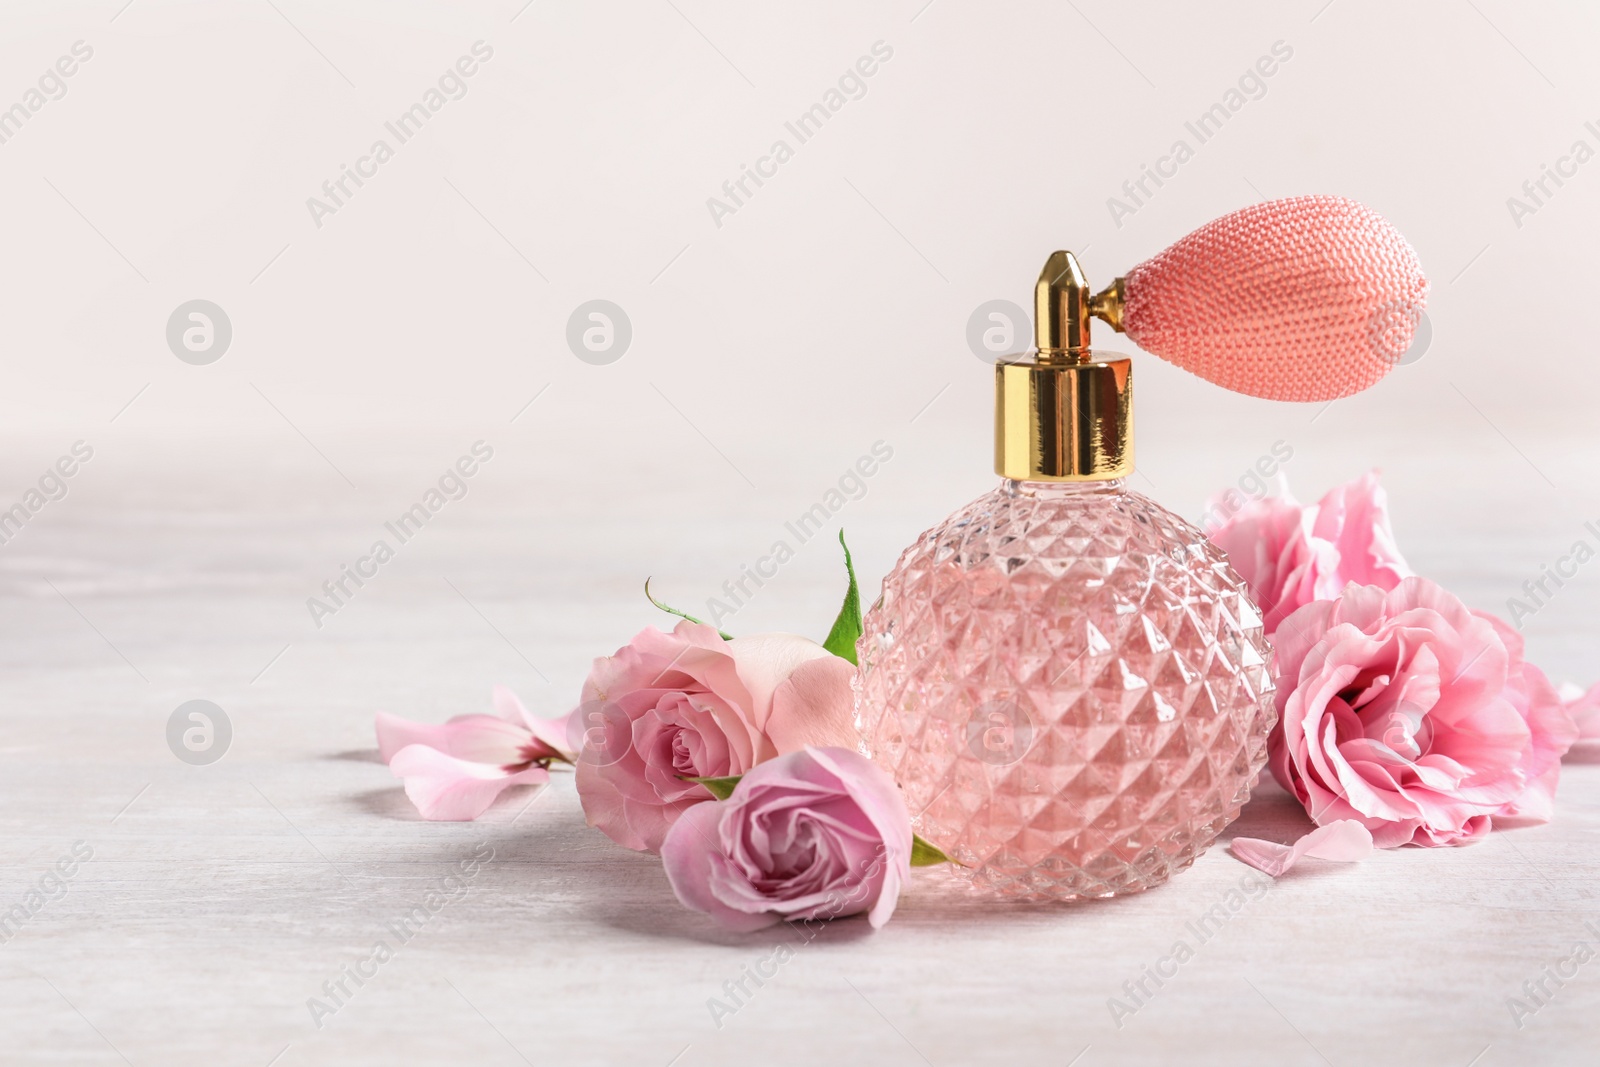 Photo of Vintage bottle of perfume and flowers on light background, space for text